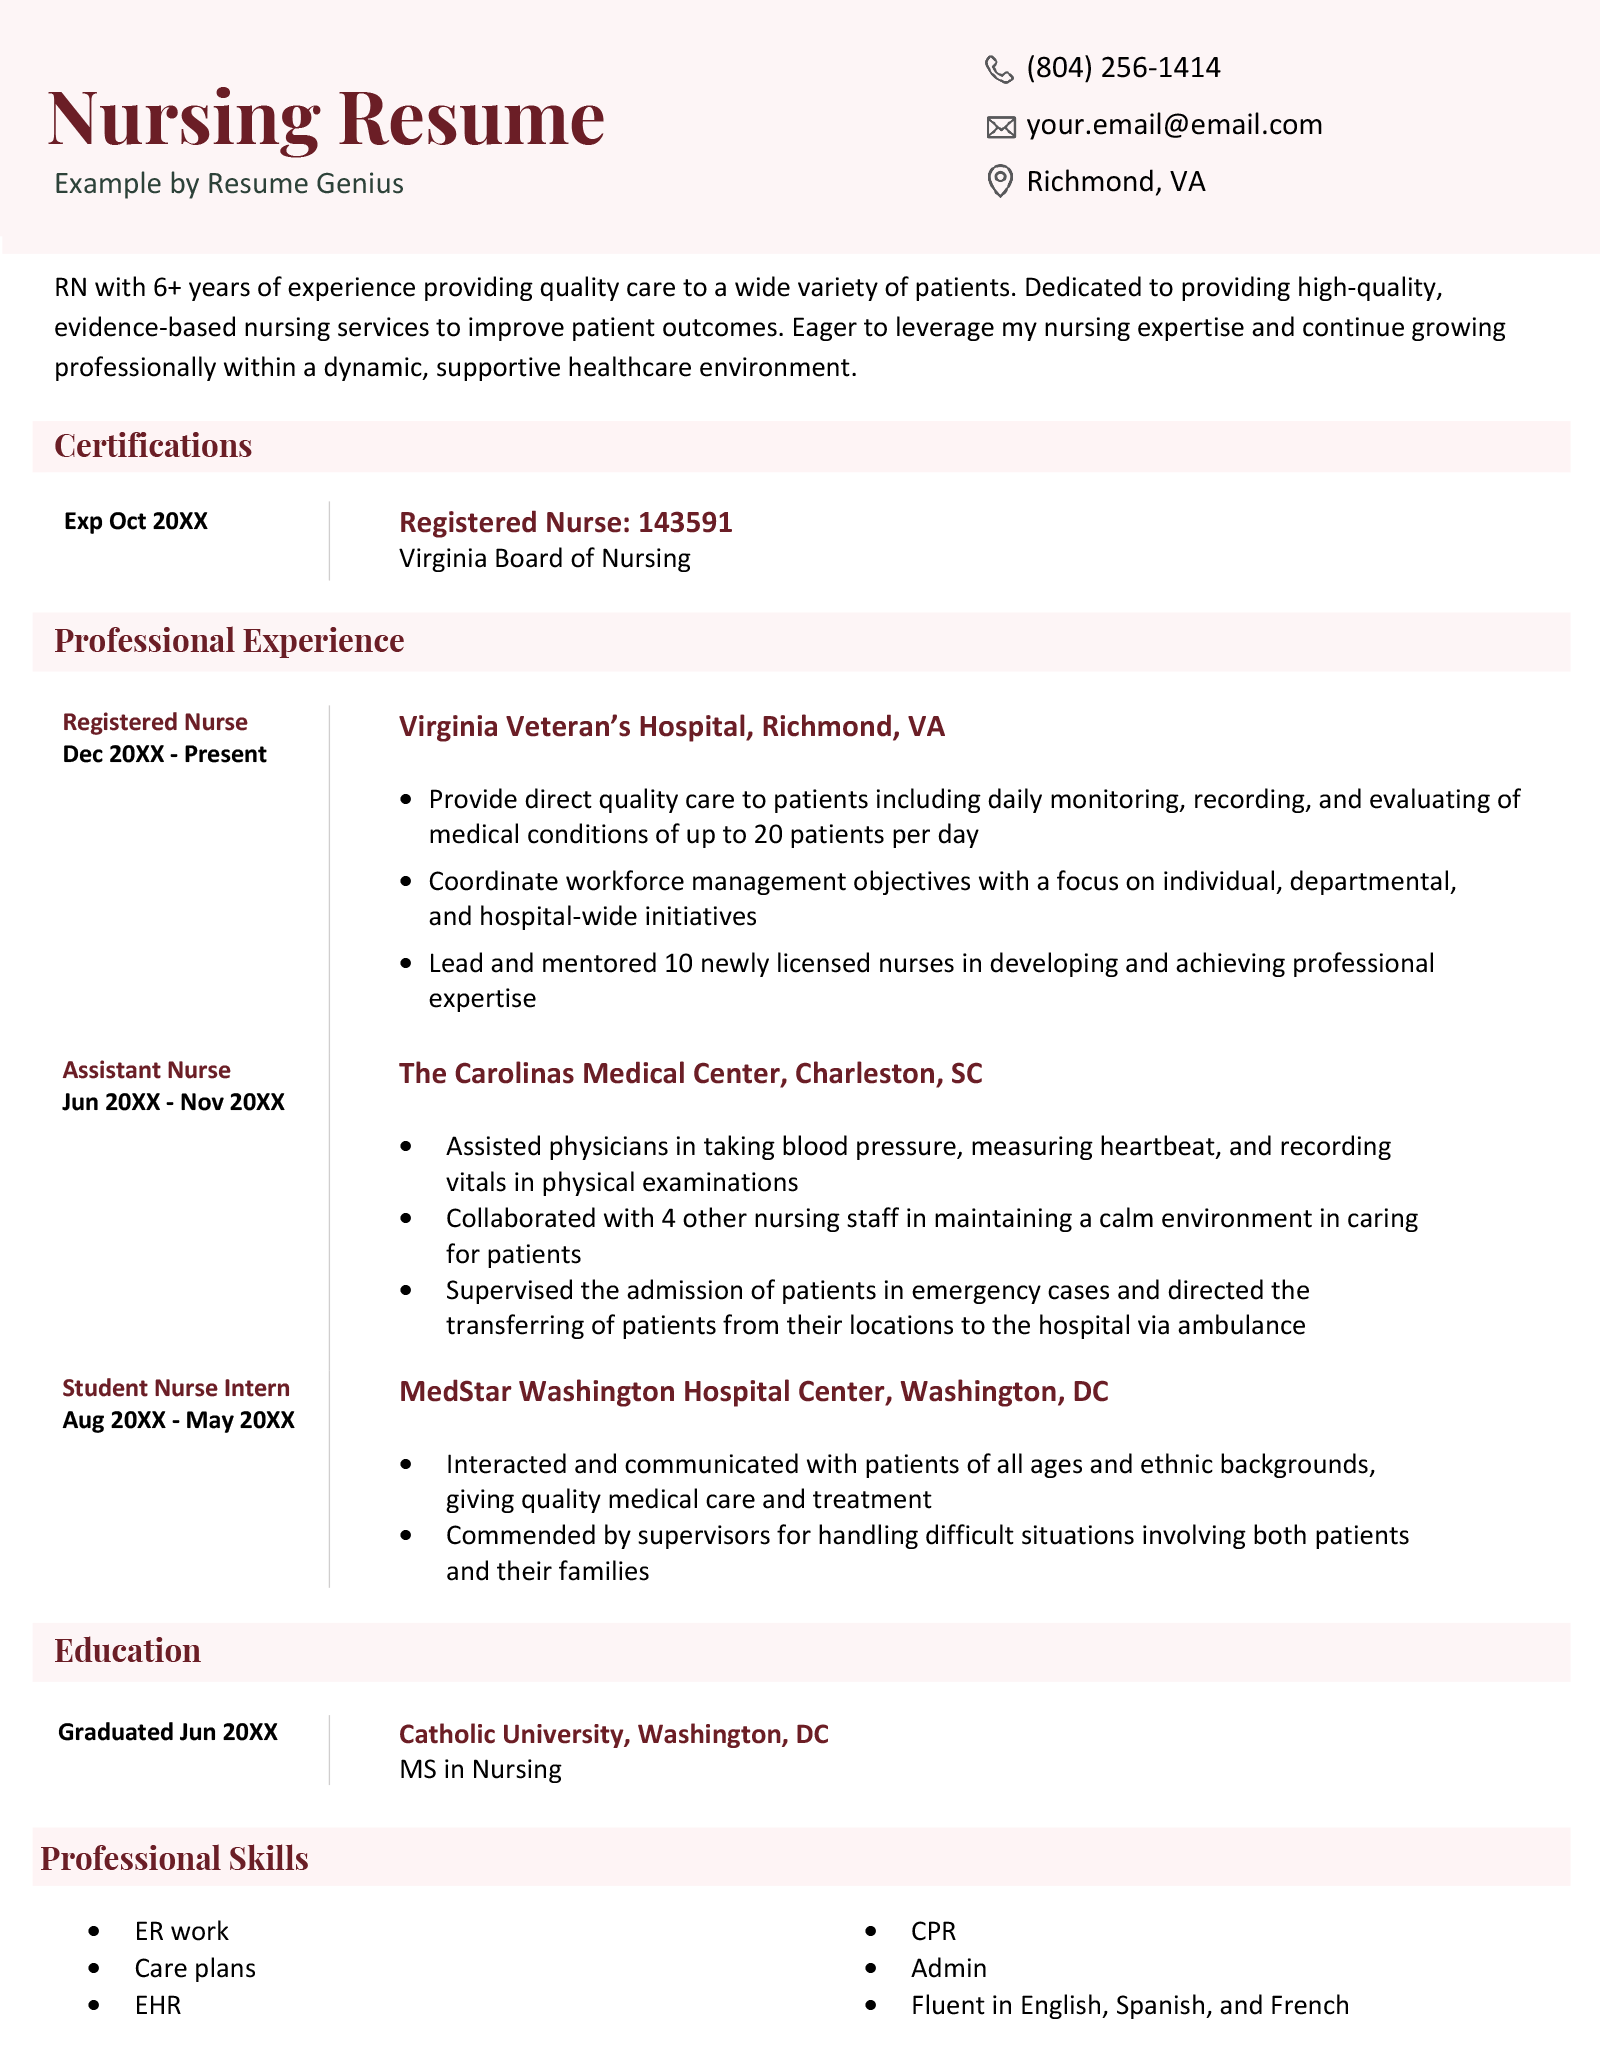 Nursing resume example using a space-efficient, red design that's highly formal